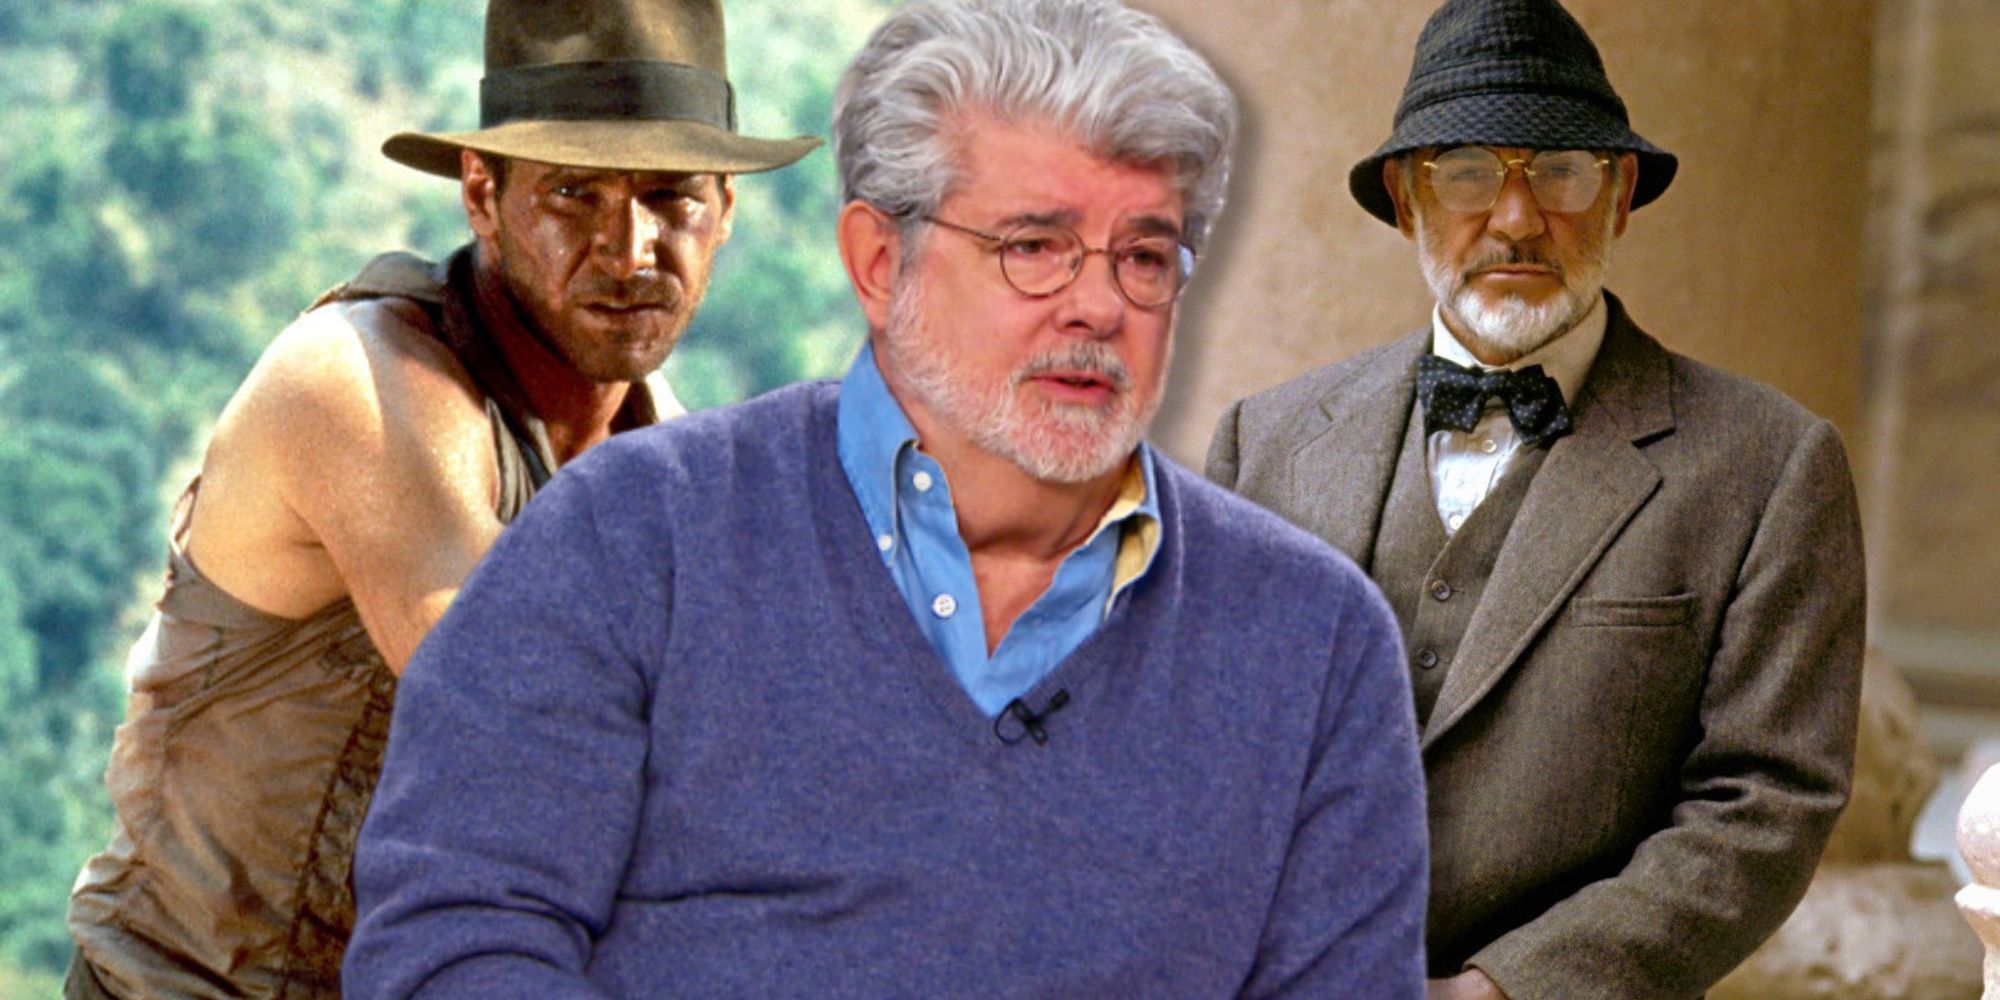 Composite image of Harrison Ford as Indiana Jones, George Lucas, and Sean Connery as Henry Jones Sr.